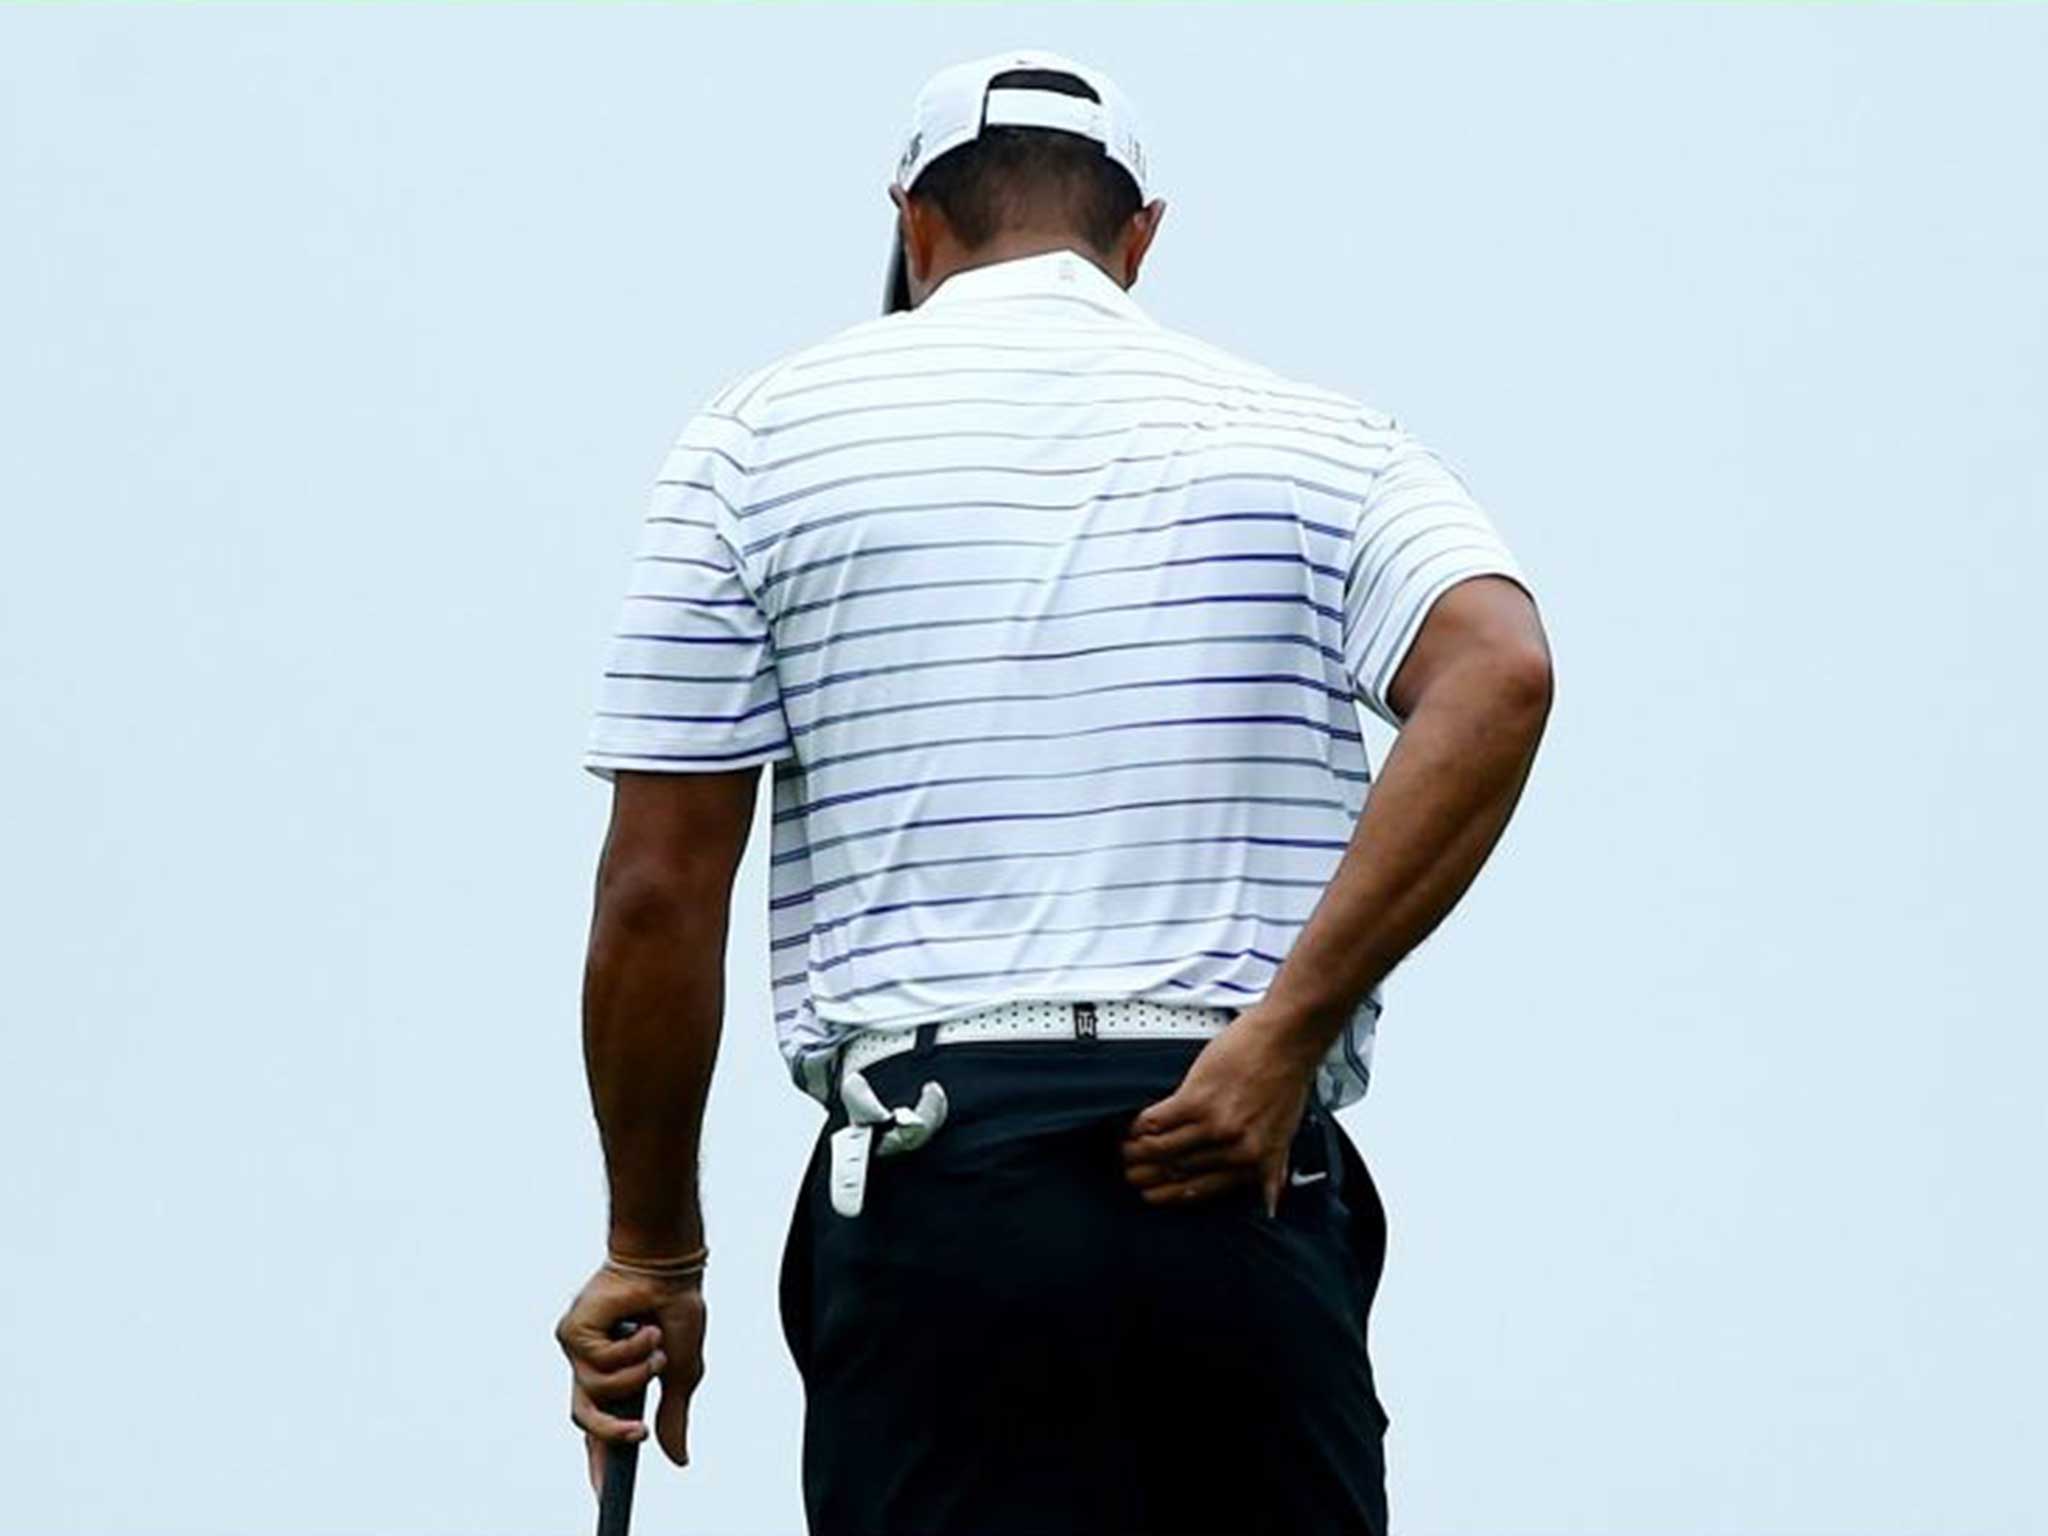 Was Woods' return to golf after back surgery in April premature?